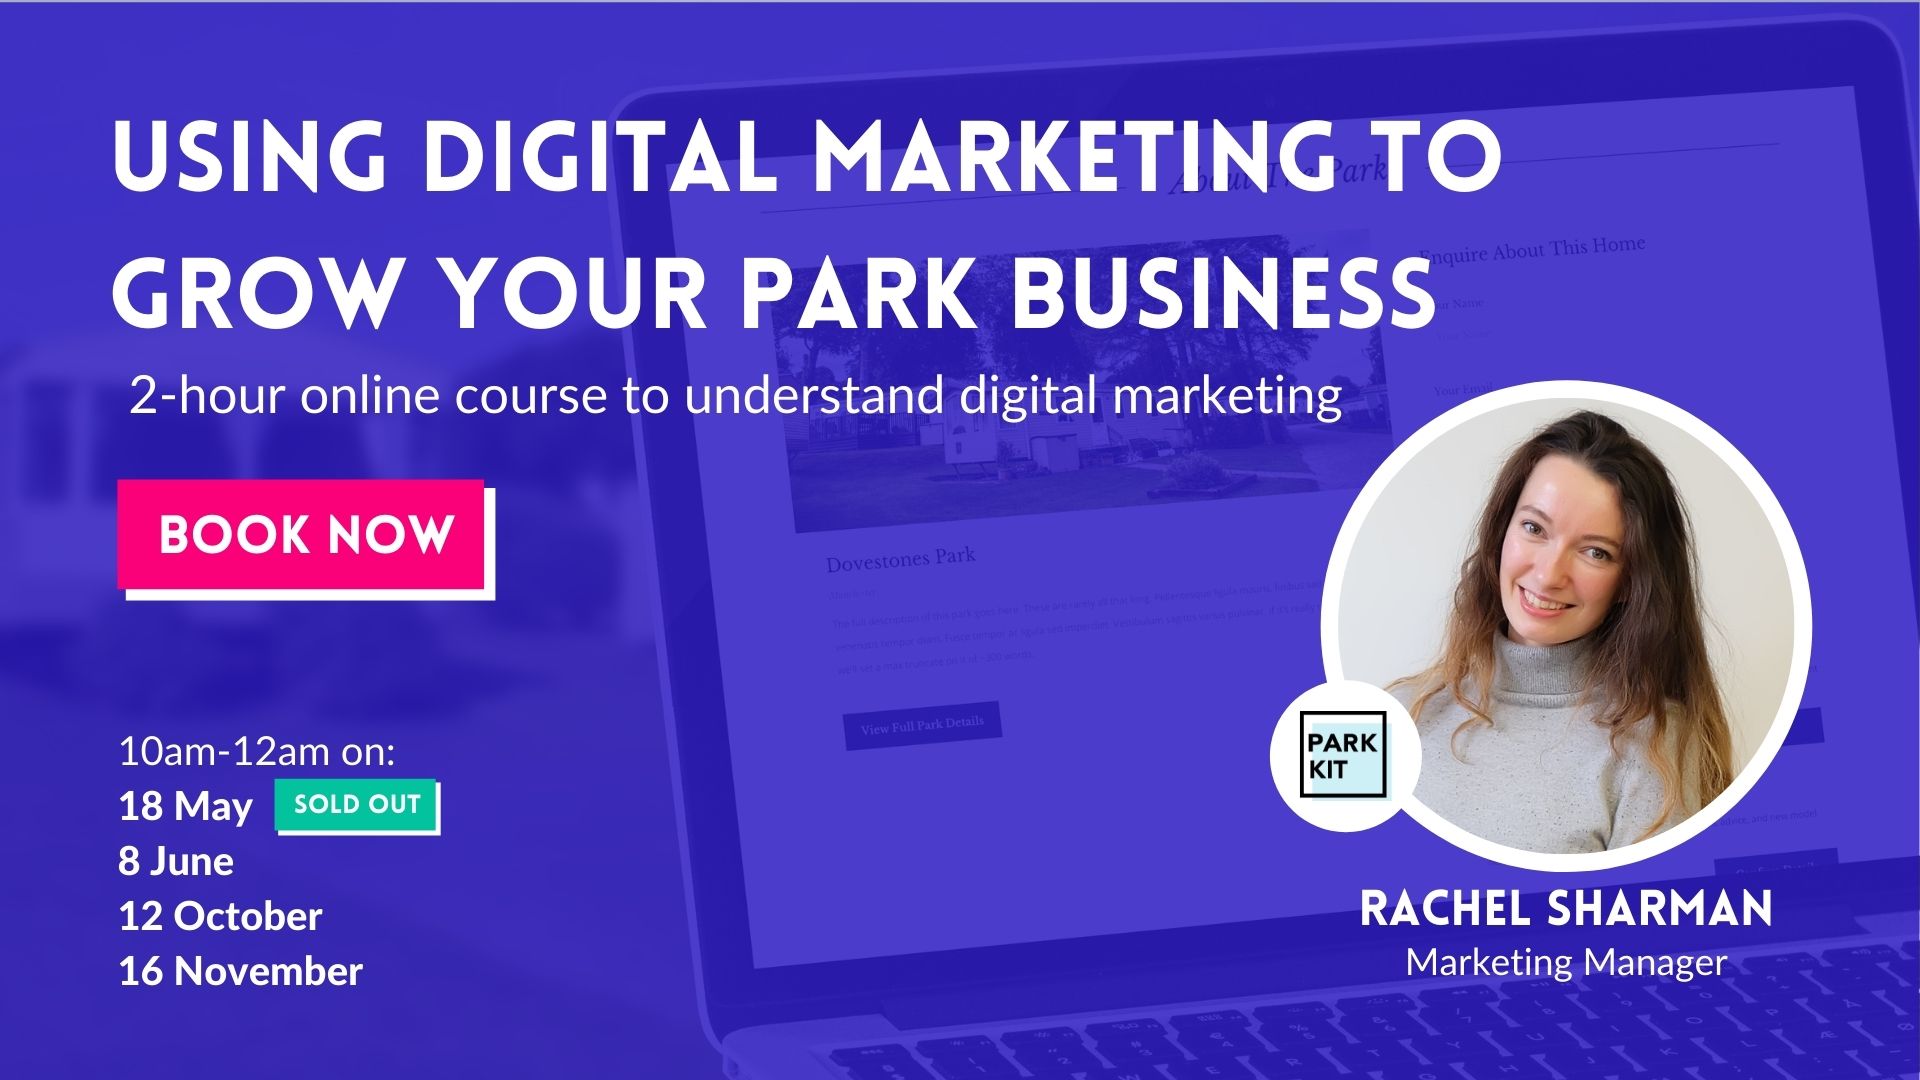 Using digital marketing to grow your park business